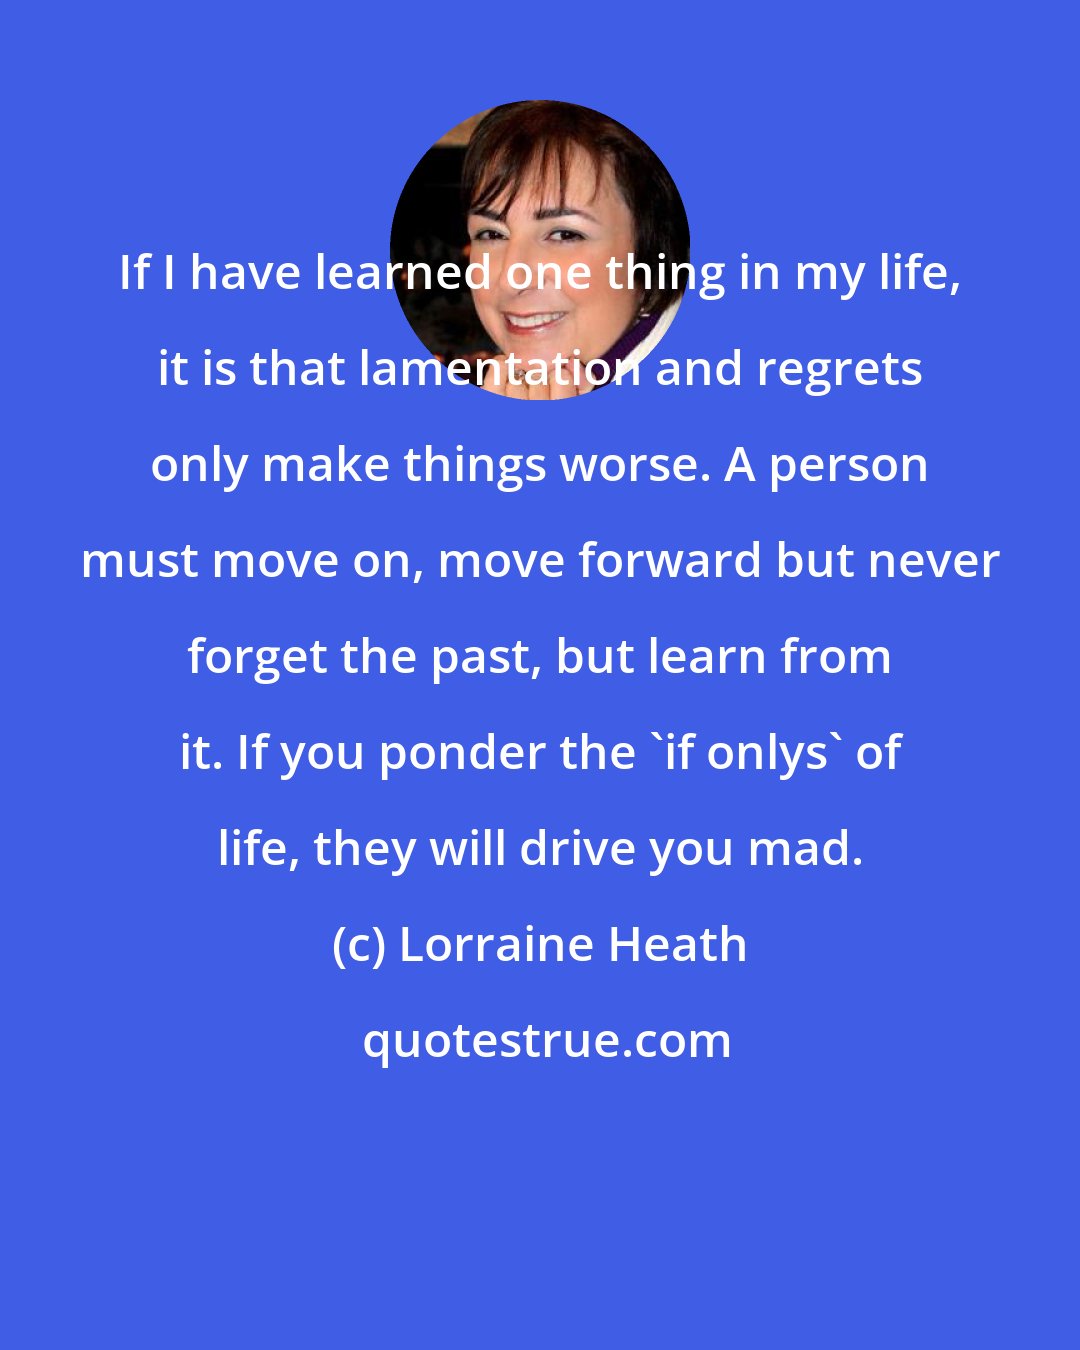 Lorraine Heath: If I have learned one thing in my life, it is that lamentation and regrets only make things worse. A person must move on, move forward but never forget the past, but learn from it. If you ponder the 'if onlys' of life, they will drive you mad.